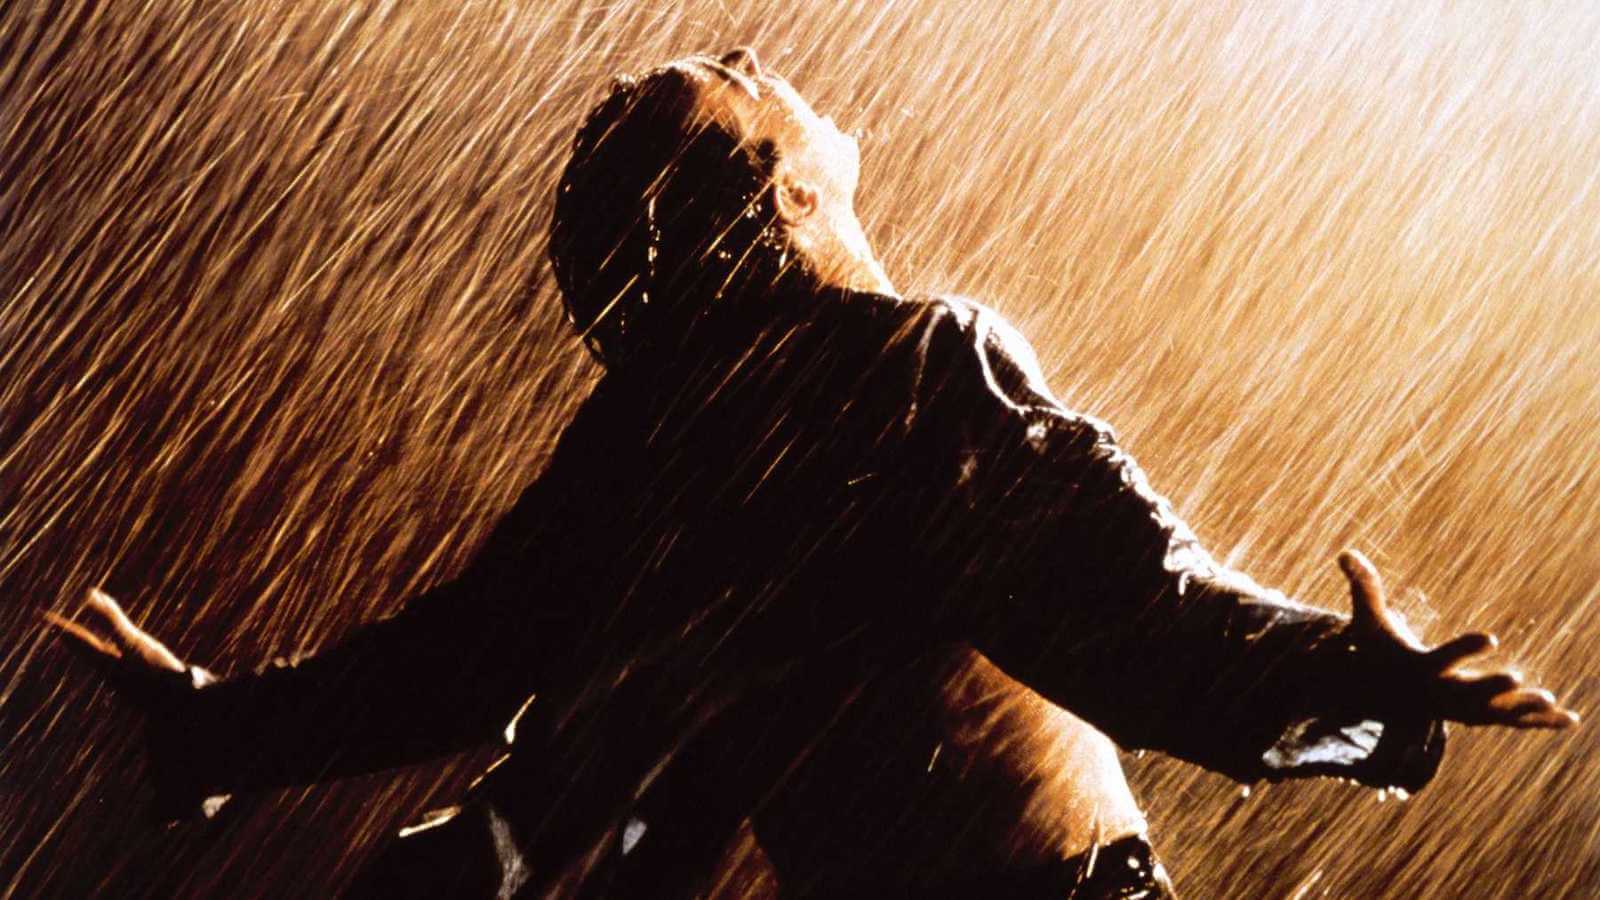 What is Poetic Irony - The Shawshank Redemption - Featured - StudioBinder